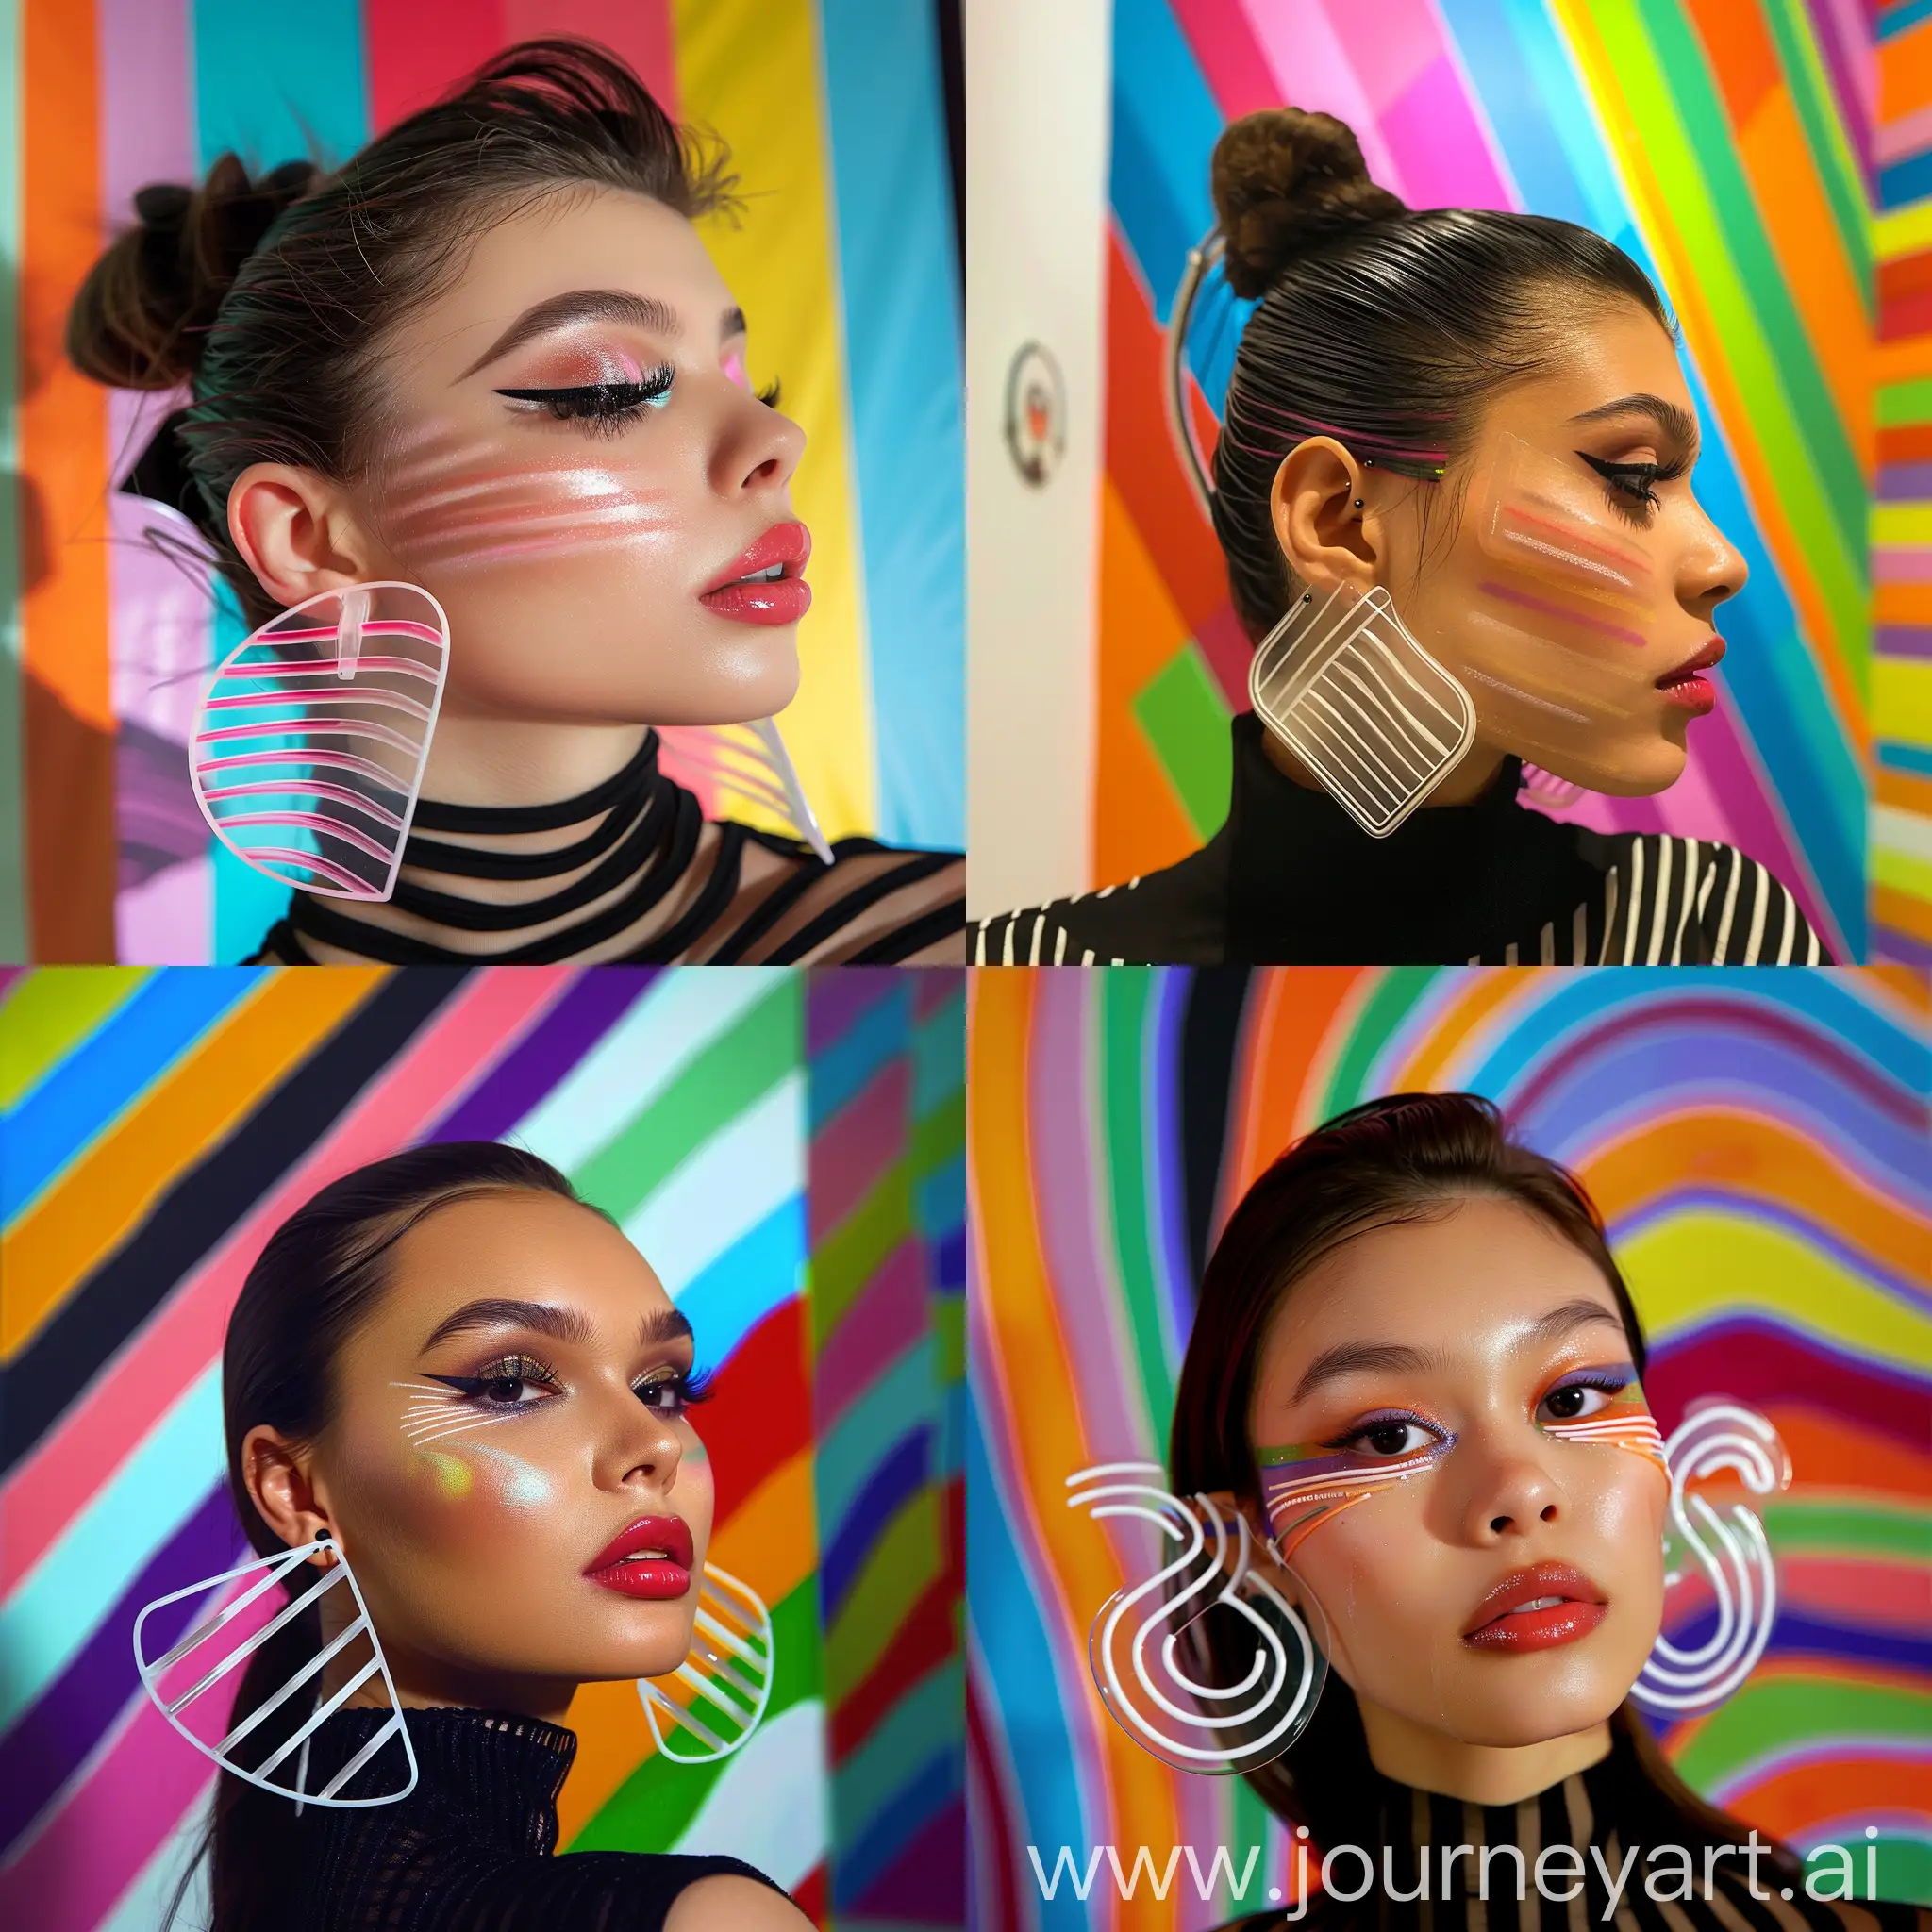 Girl-with-Smokey-Eye-Makeup-and-Plastic-Line-Earrings-in-Front-of-Colorful-Striped-Mural